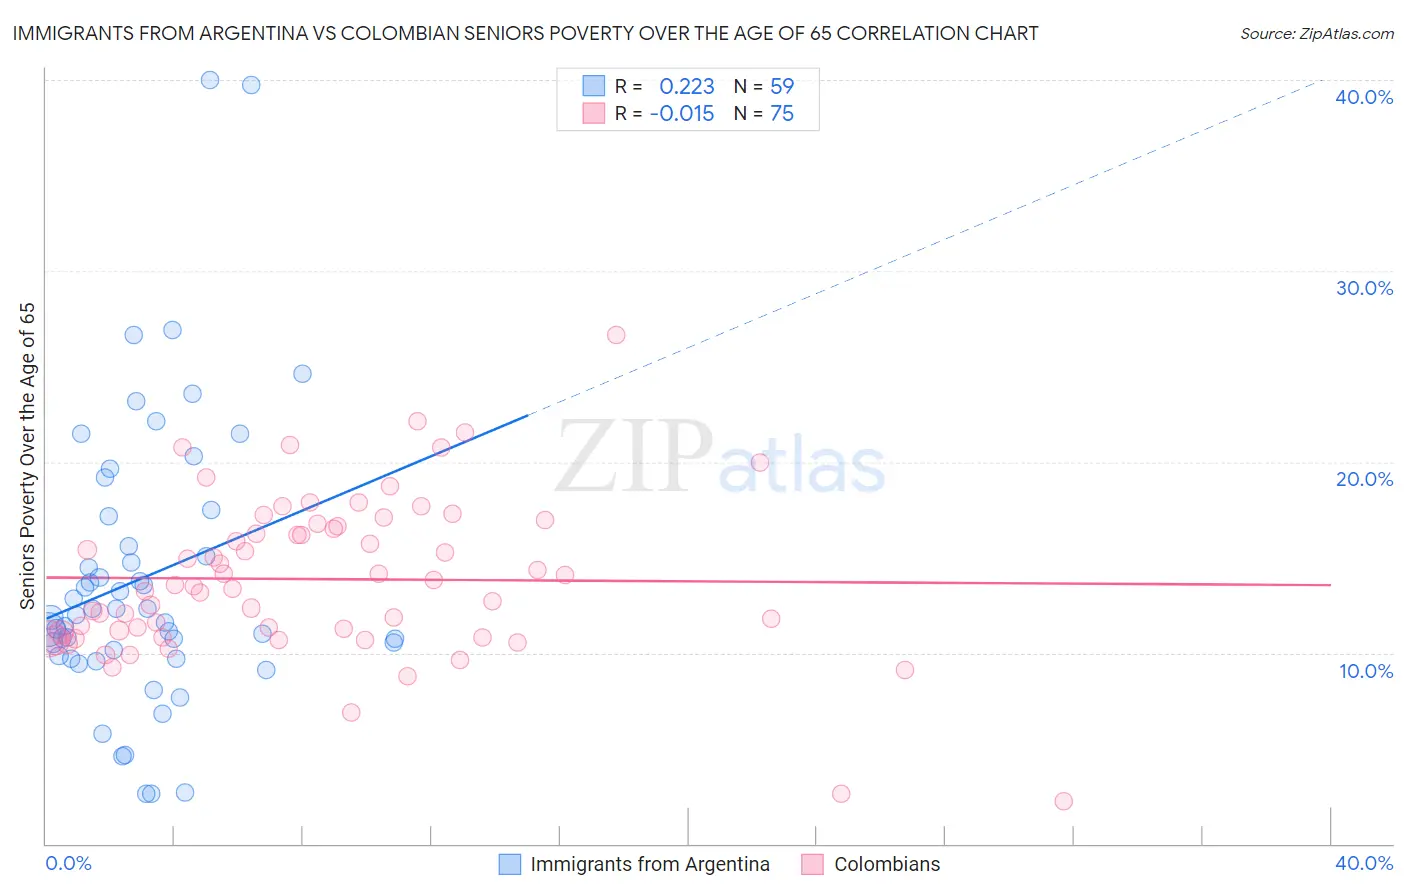 Immigrants from Argentina vs Colombian Seniors Poverty Over the Age of 65